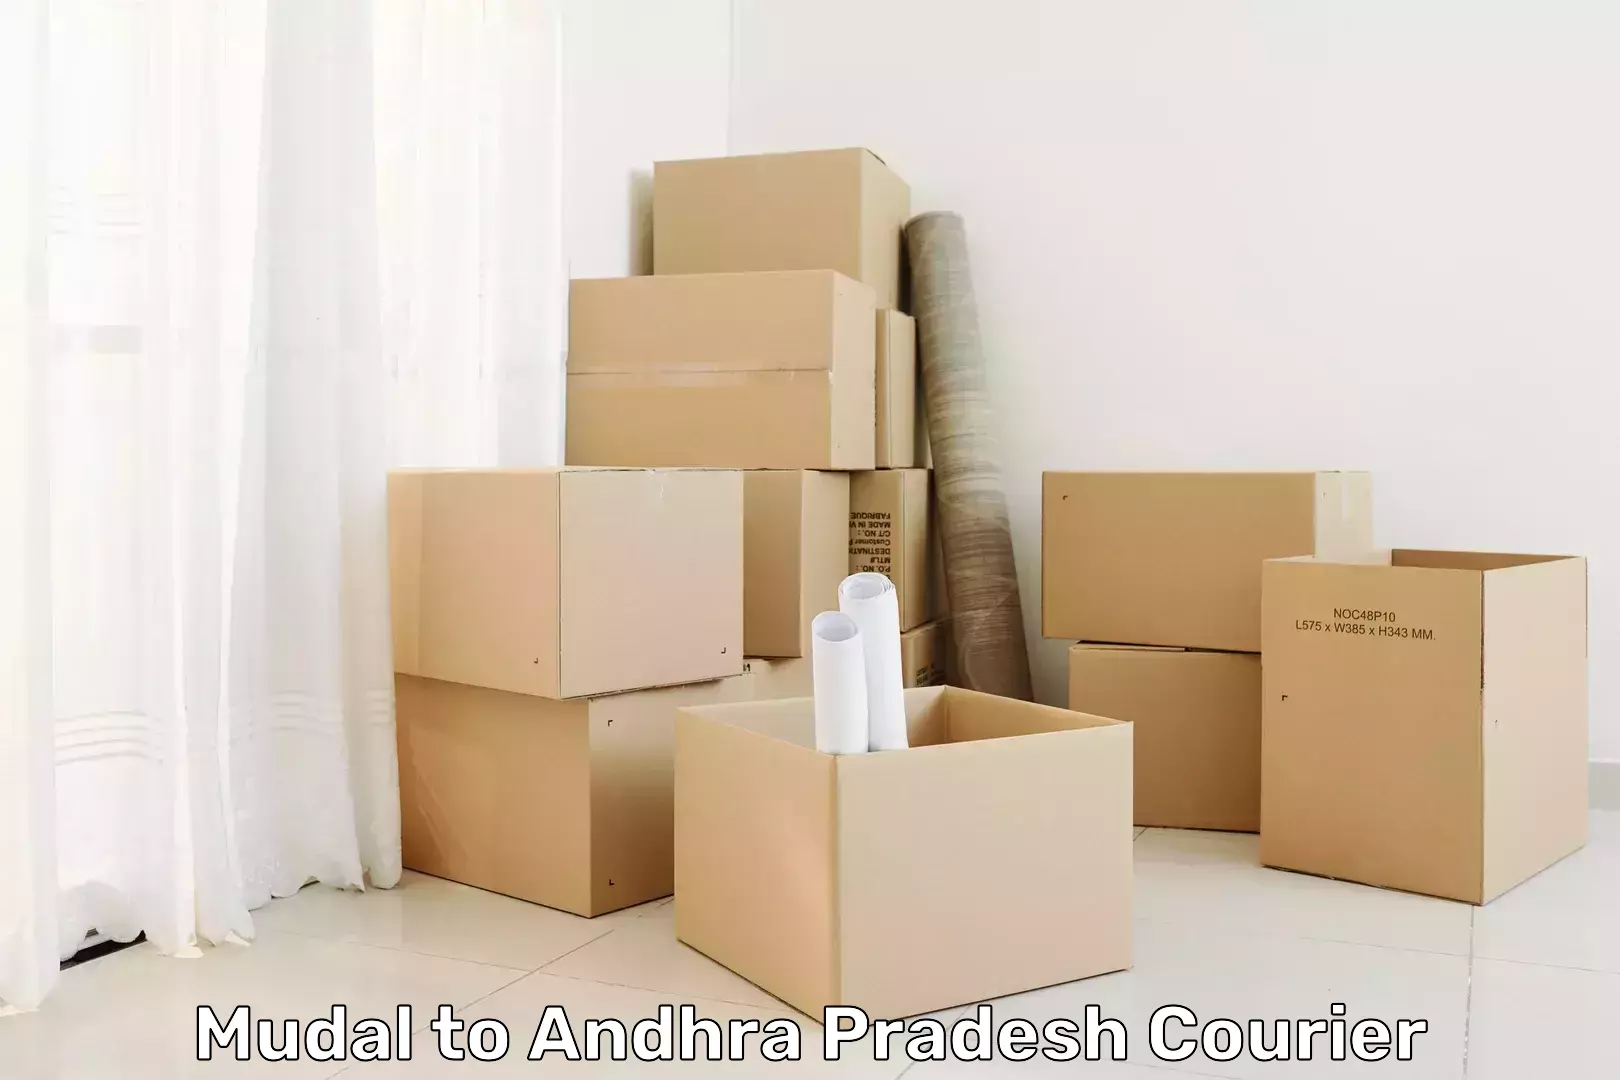 Fast-track shipping solutions Mudal to Bobbili